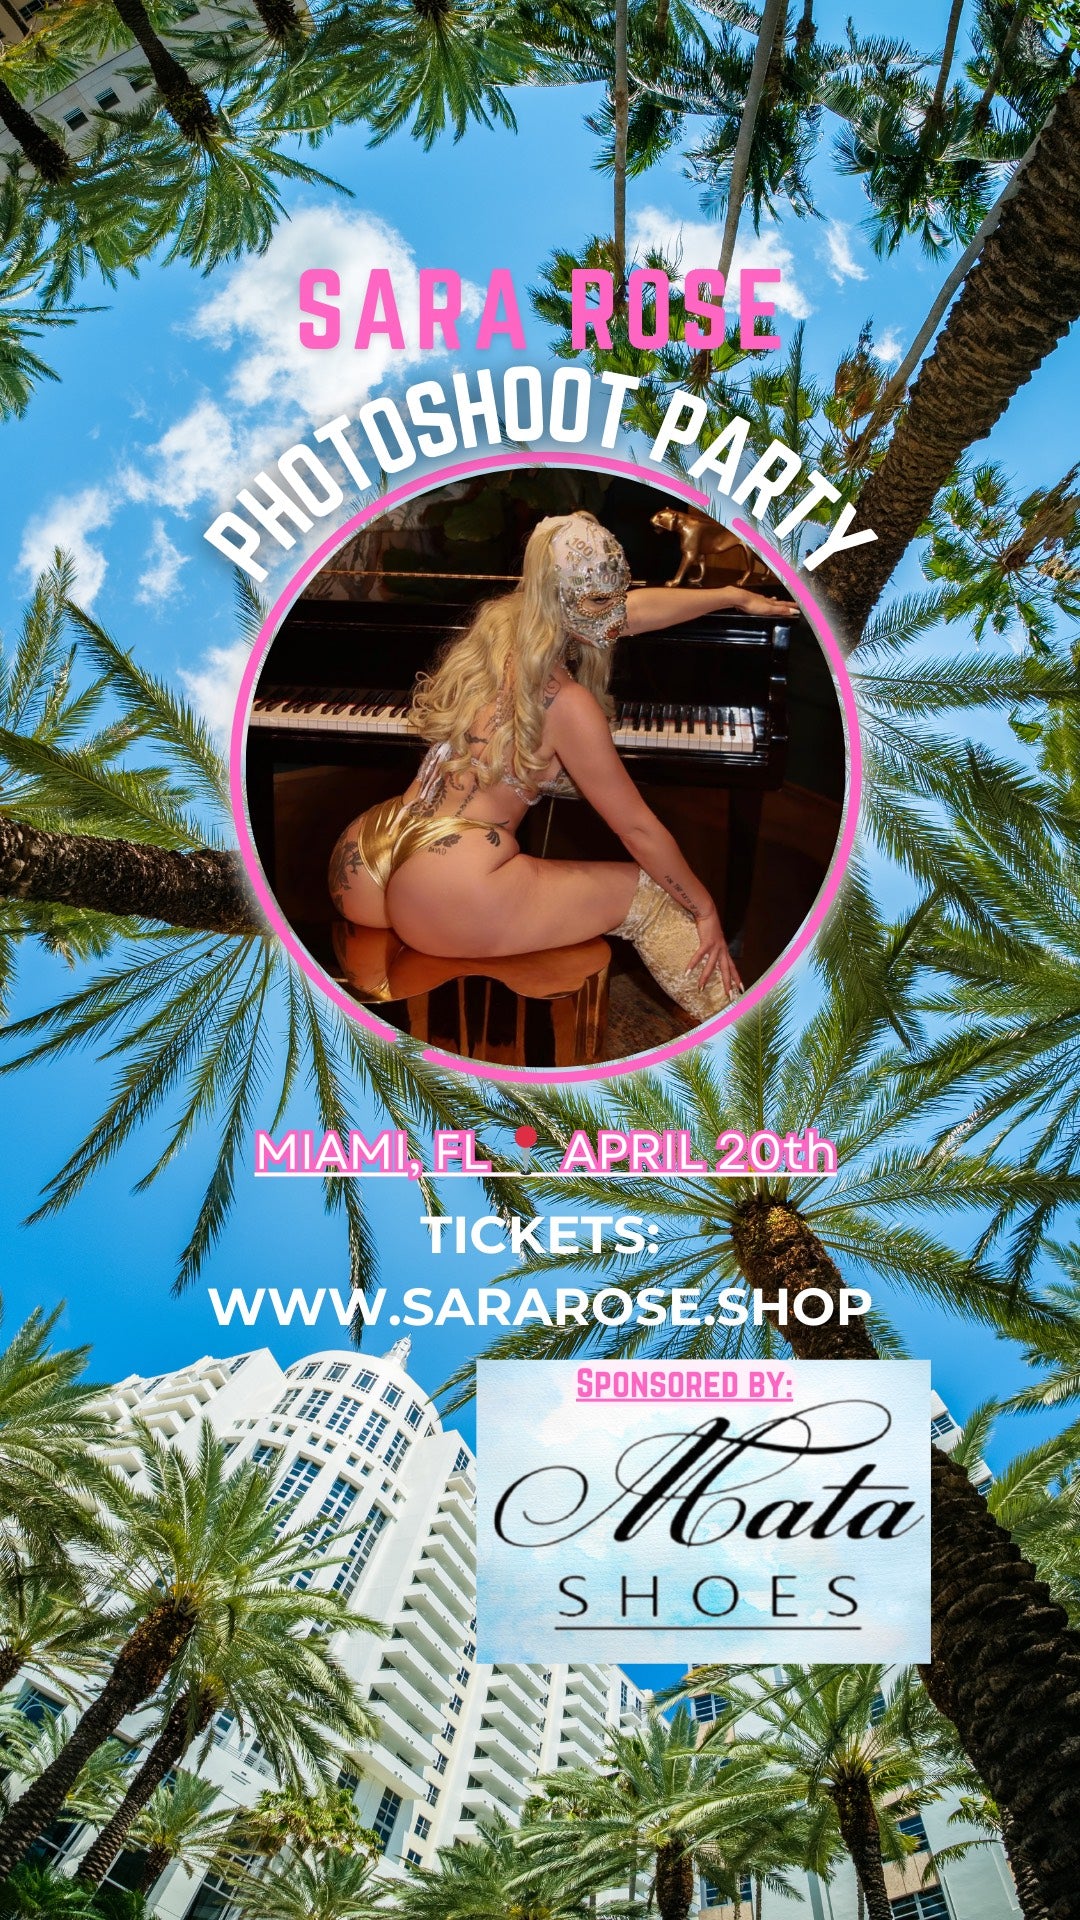 April 20th: 
Photoshoot Party- Model + Photo Package! 12:00 Noon-2:00PM